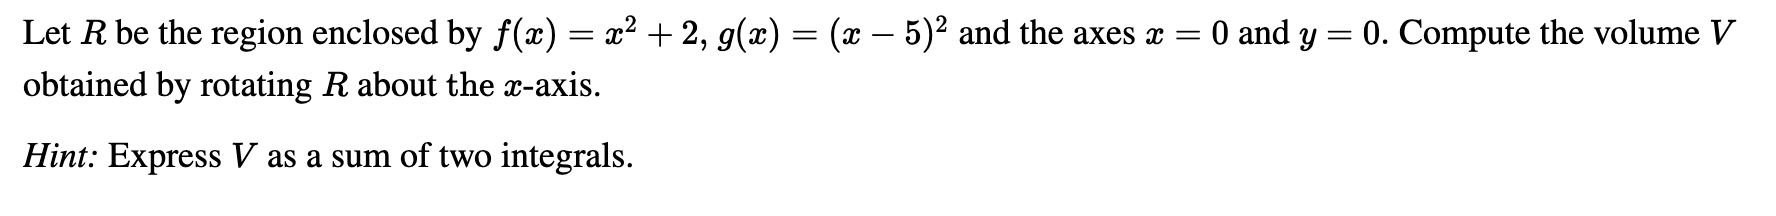 Let R be the region enclosed by f(x) = x² + 2, g(x) = (x – 5)² and the axes x = 0 and y = 0. Compute the volume V
obtained by rotating R about the x-axis.
Hint: Express V as a sum of two integrals.
